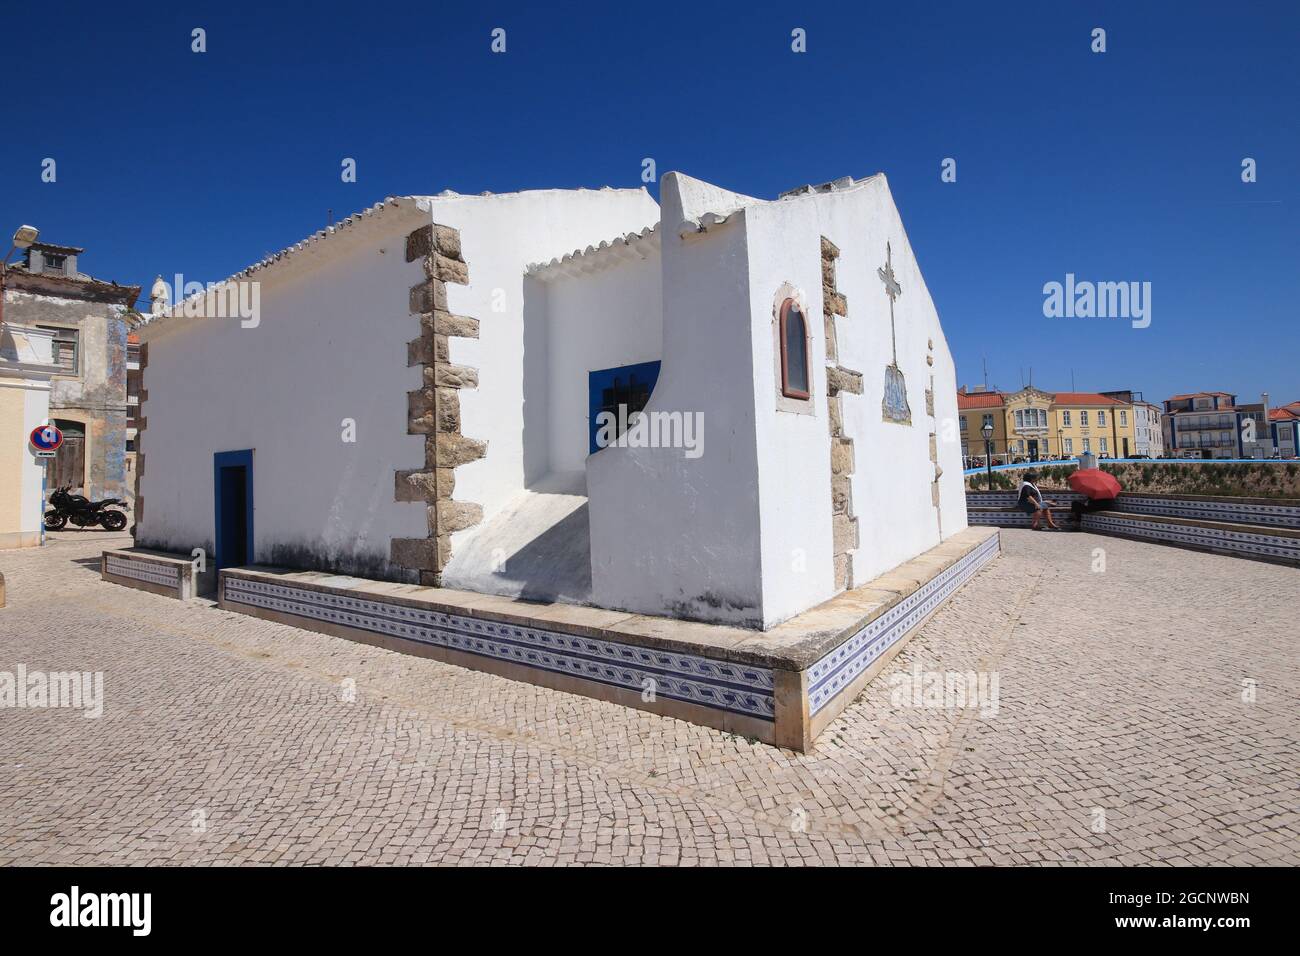 ERICEIR, PORTUGAL - Jun 25, 2021: Small chapel in the village of Ericeira, Portugal. June 2021 Stock Photo